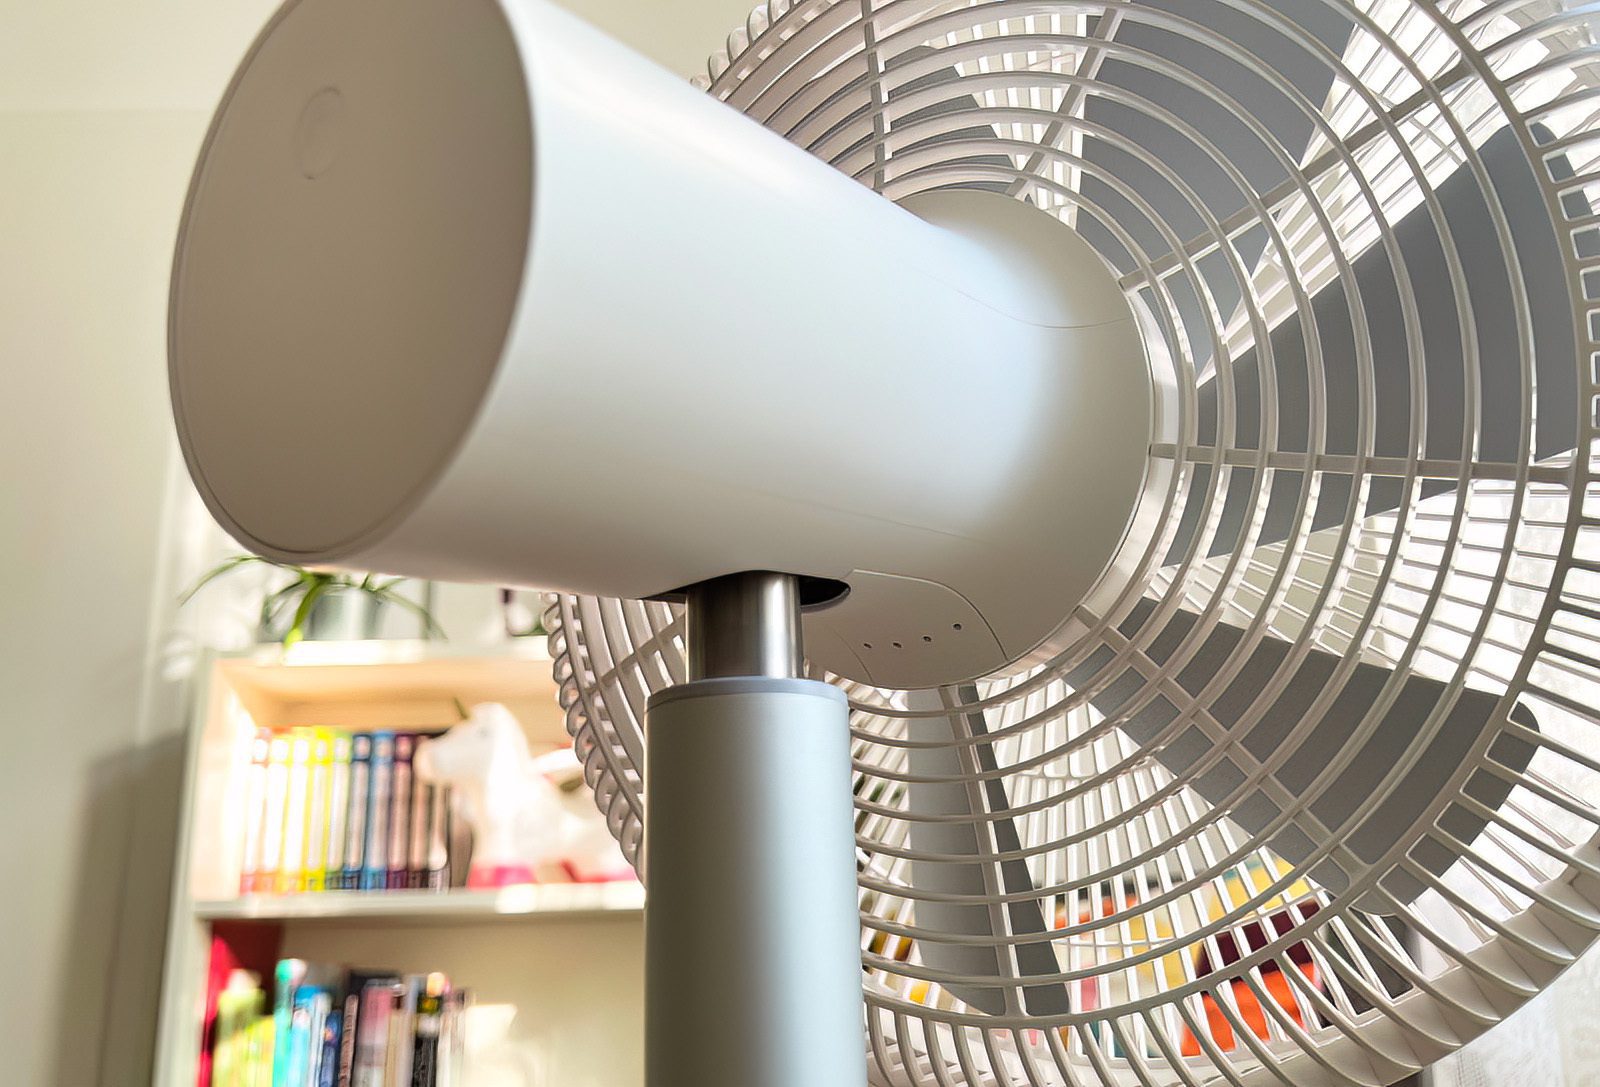 The Smartmi standing fan 3 has a clean finish, looks good and has many functions that I didn't even expect - a convincing device for just under 100 euros.